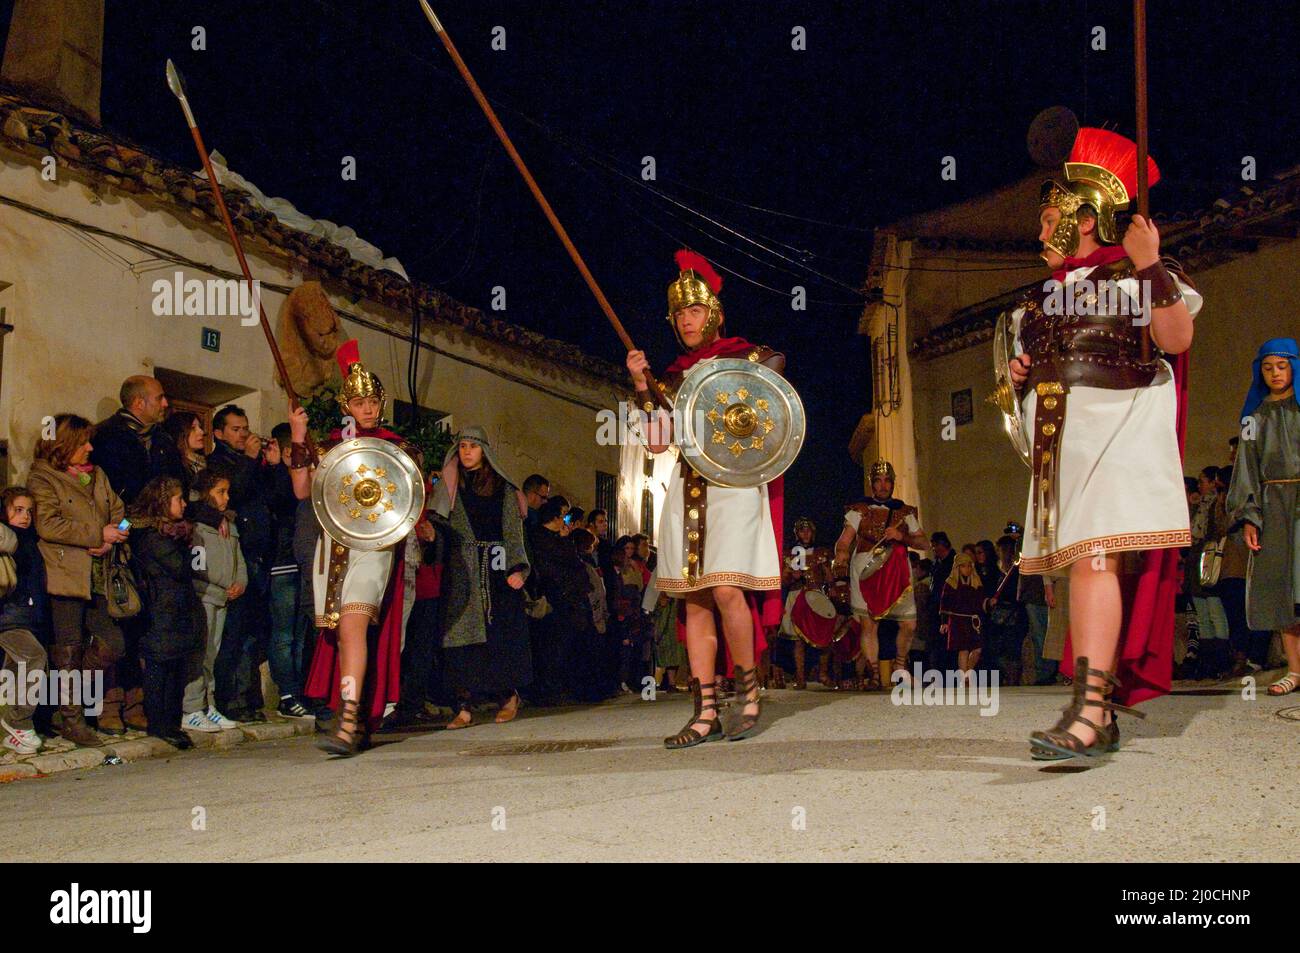 Passion of Chinchon, traditional Holy Week performance. Chinchon, Madrid province, Spain. Stock Photo